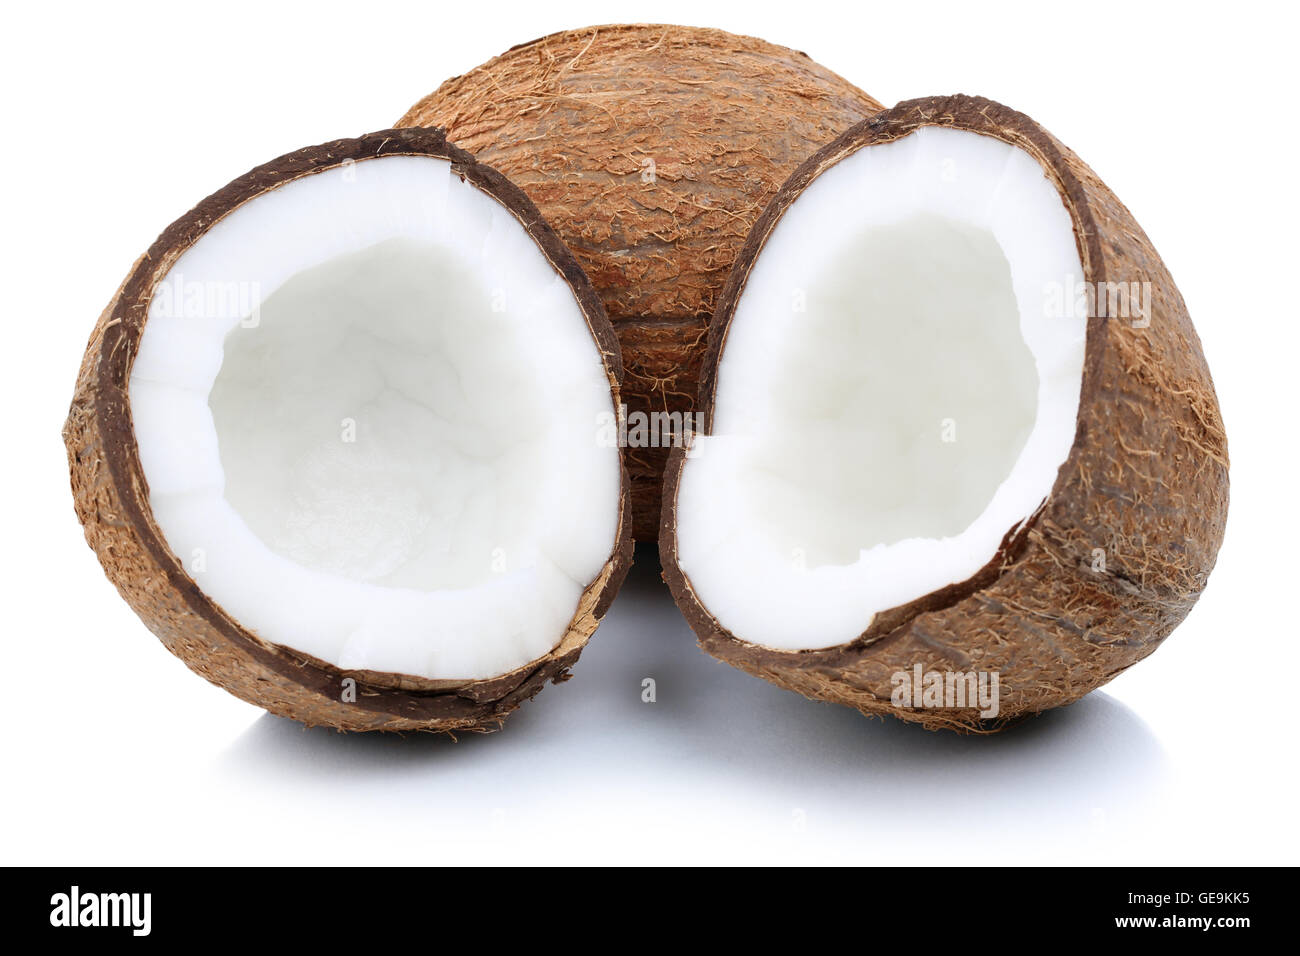 Coconut coconuts fruit sliced half fruits isolated on a white background Stock Photo